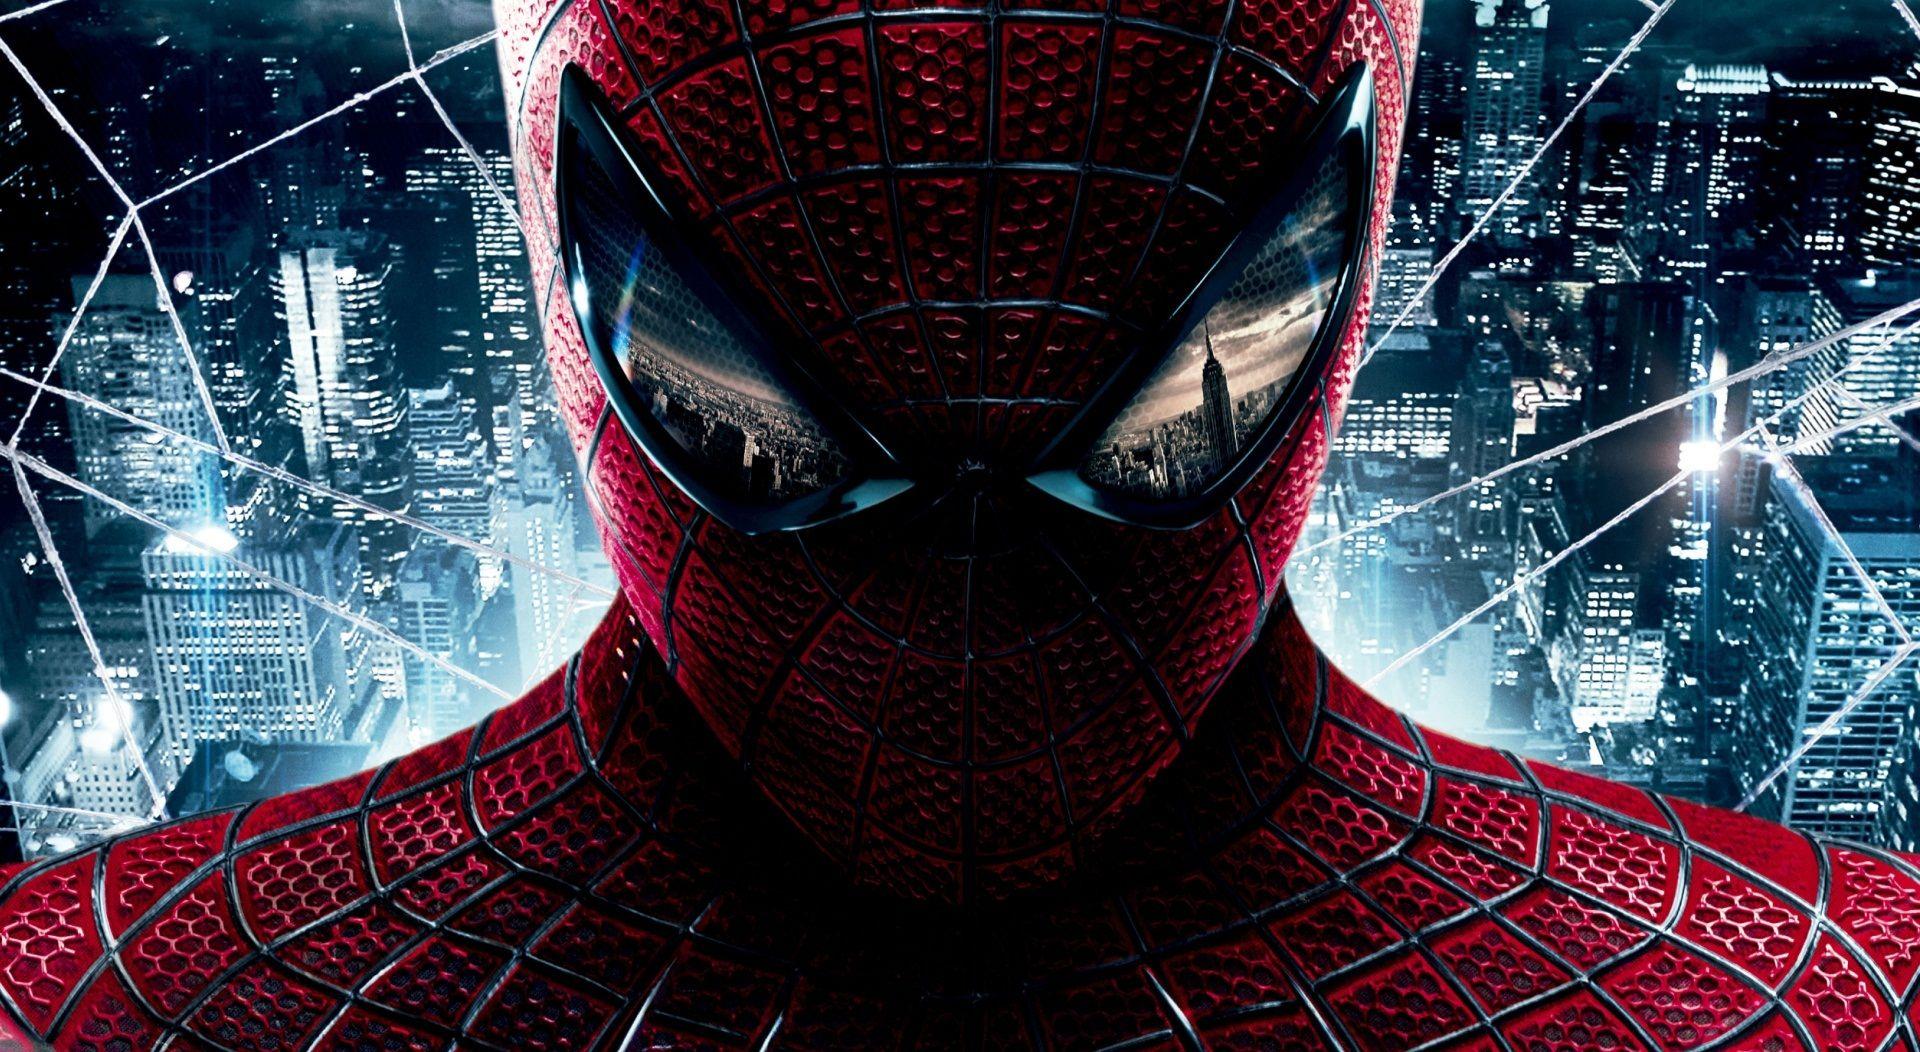 HD Movie Wallpaper. HD The Amazing Spider Man Hollywood Movie